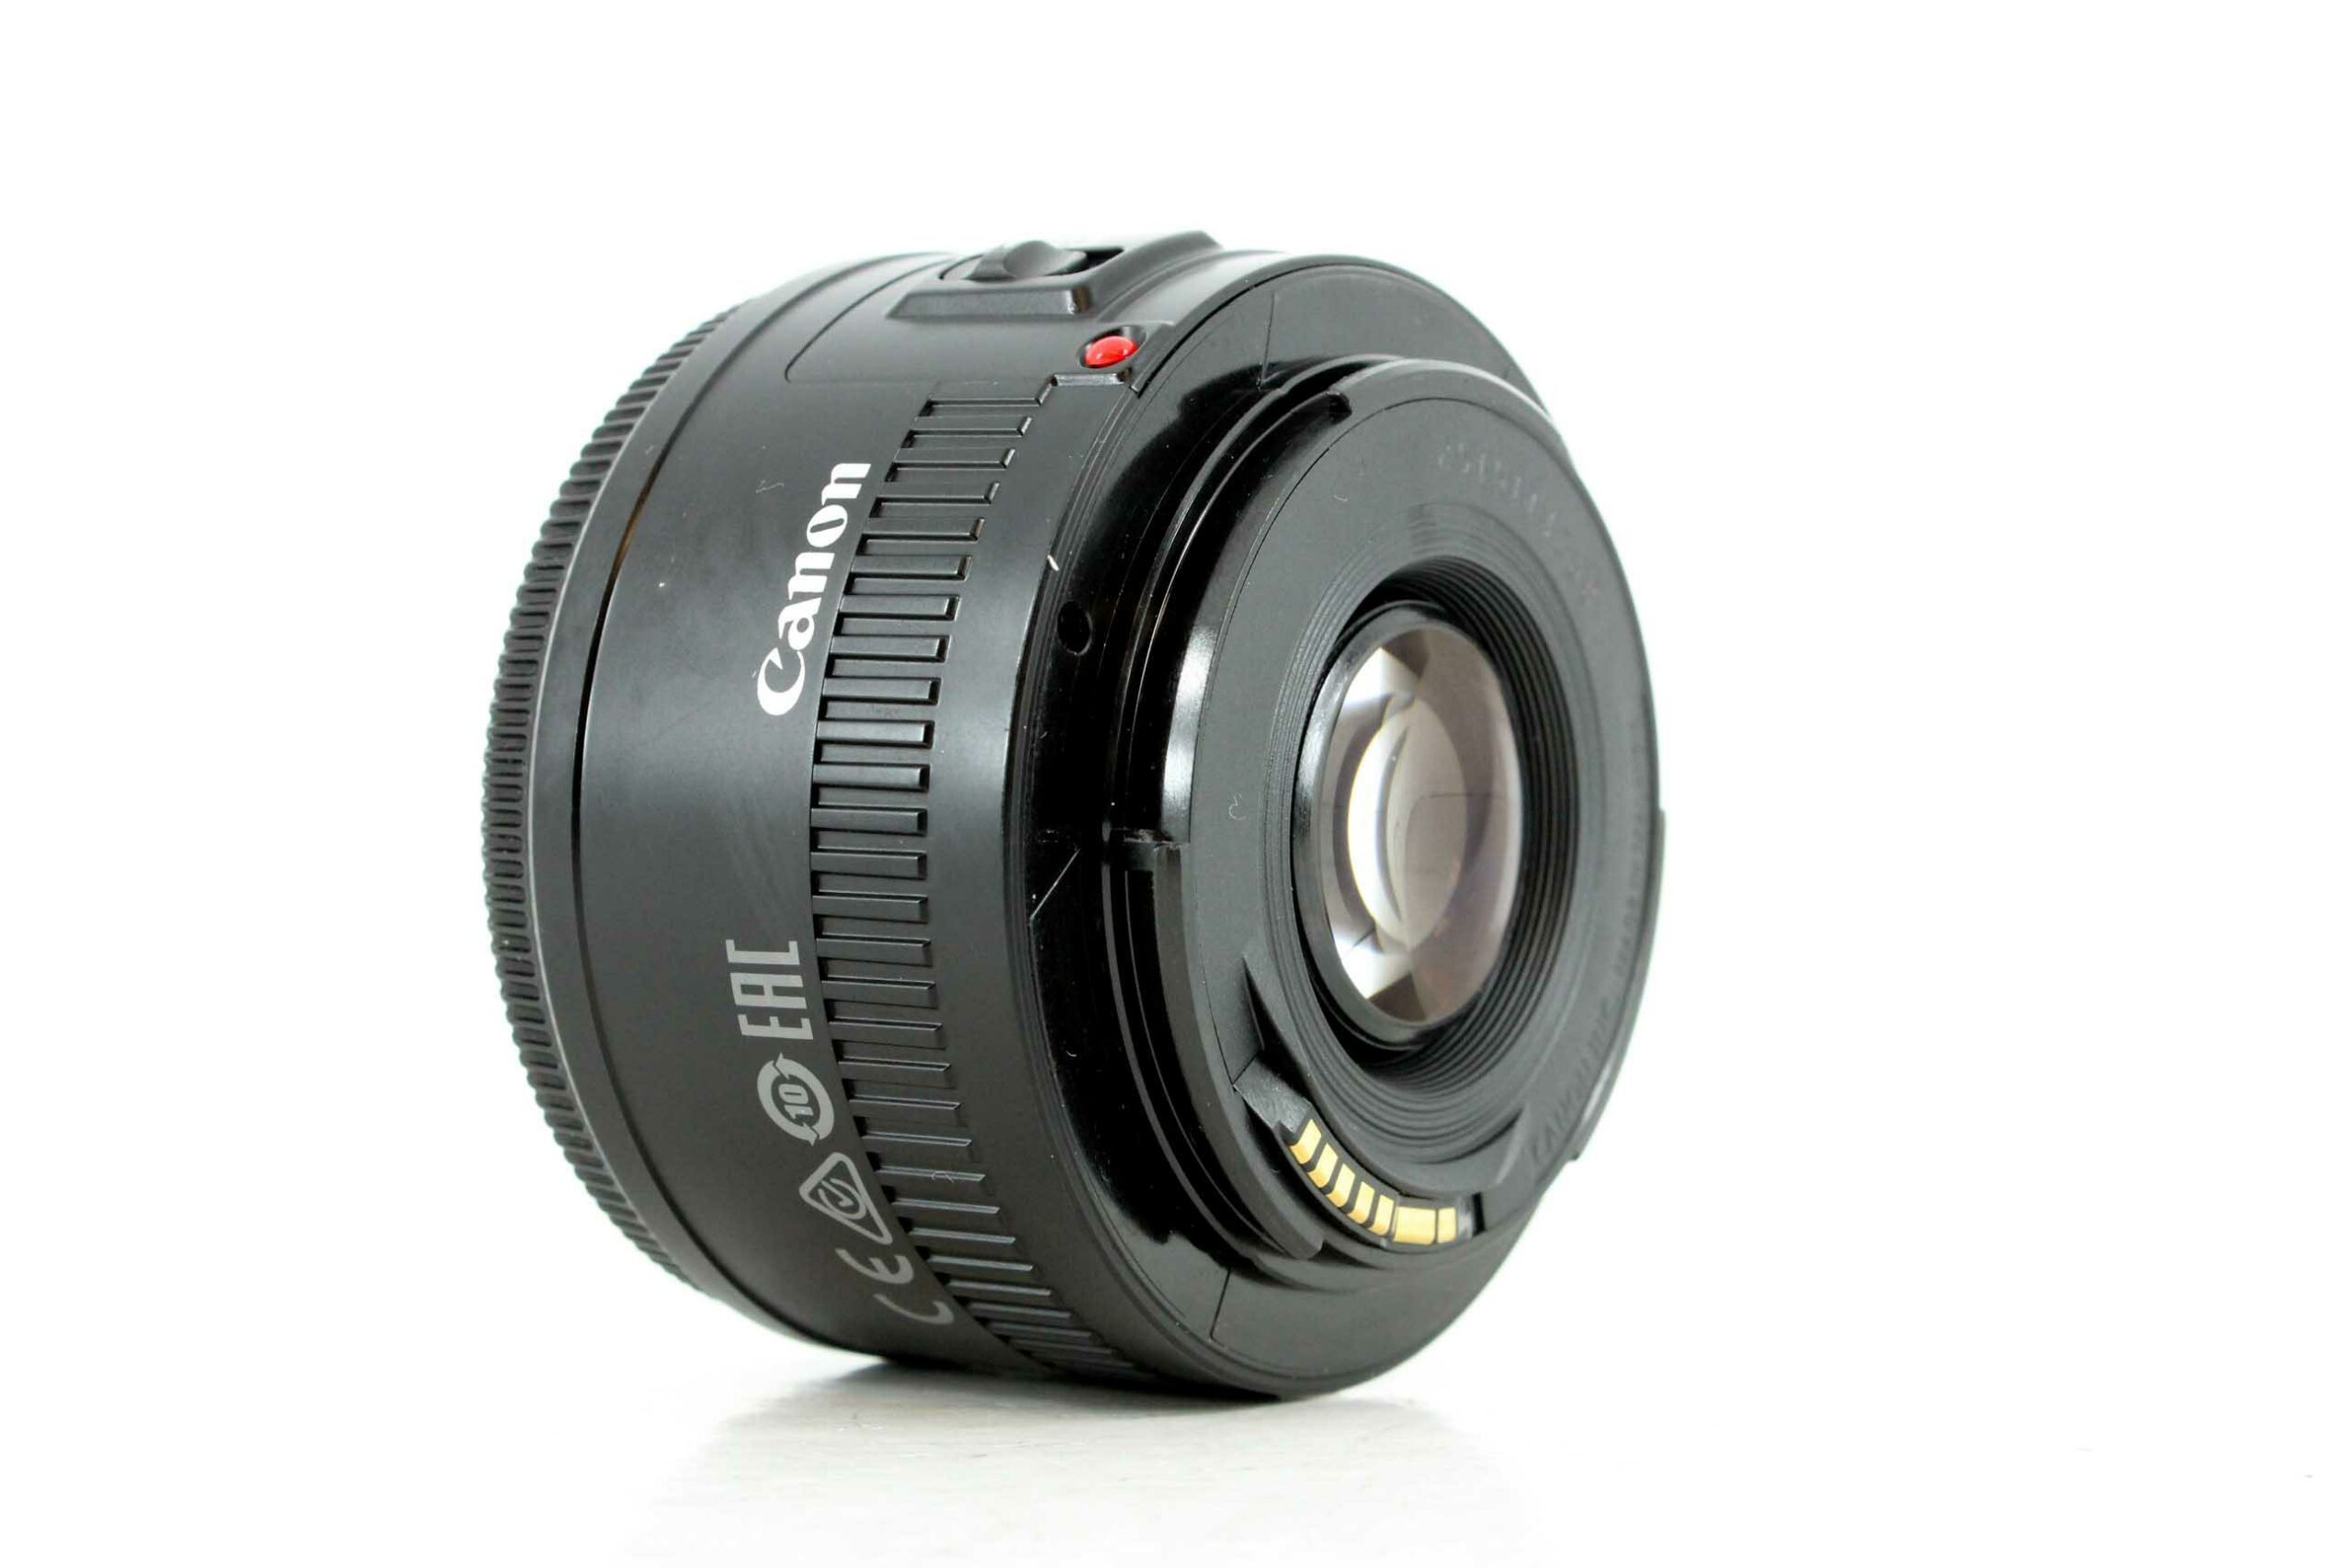  Canon Cameras US 2514A002 EF 50mm f/1.8 II Camera Lens - Fixed  (Discontinued by Manufacturer) : Camera Lenses : Electronics